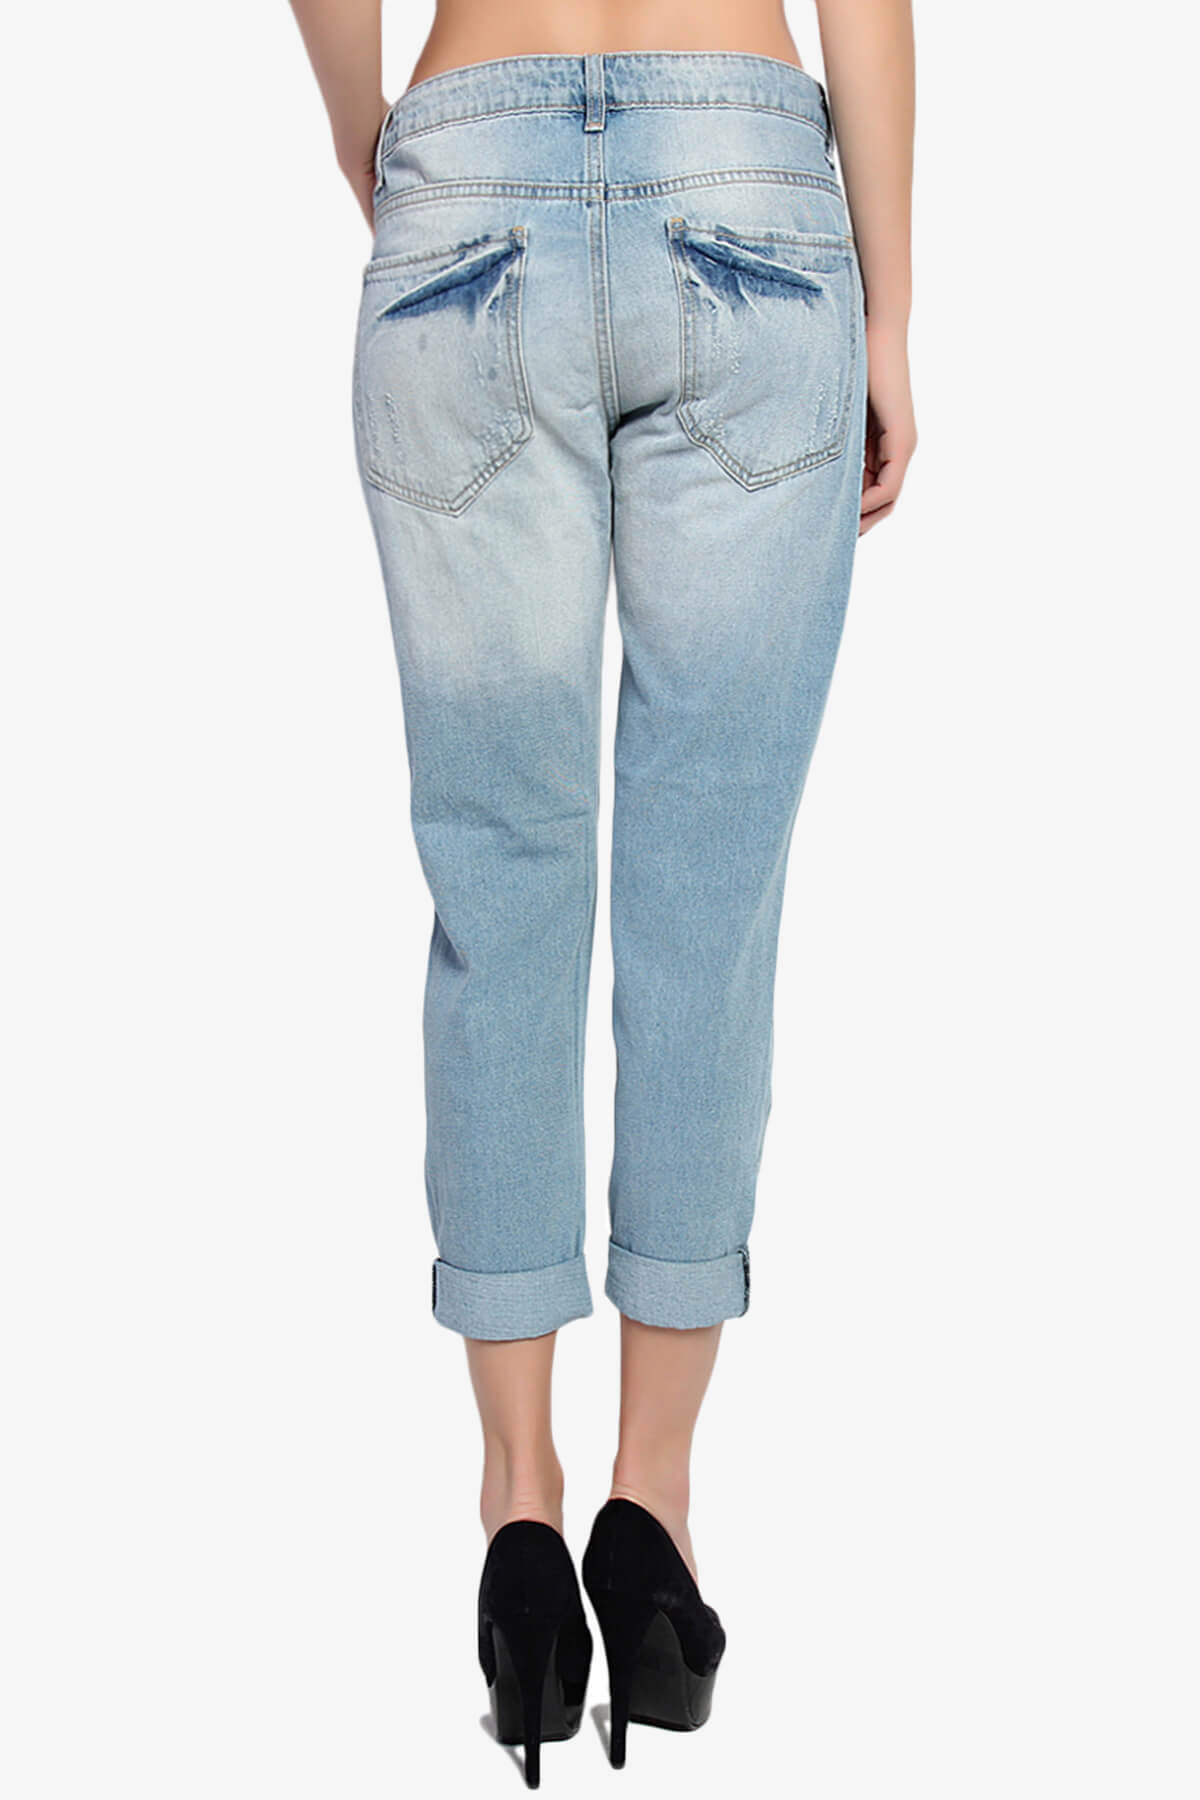 Load image into Gallery viewer, Tielo Mid Rise Ripped Boyfriend Jeans LIGHT_2
